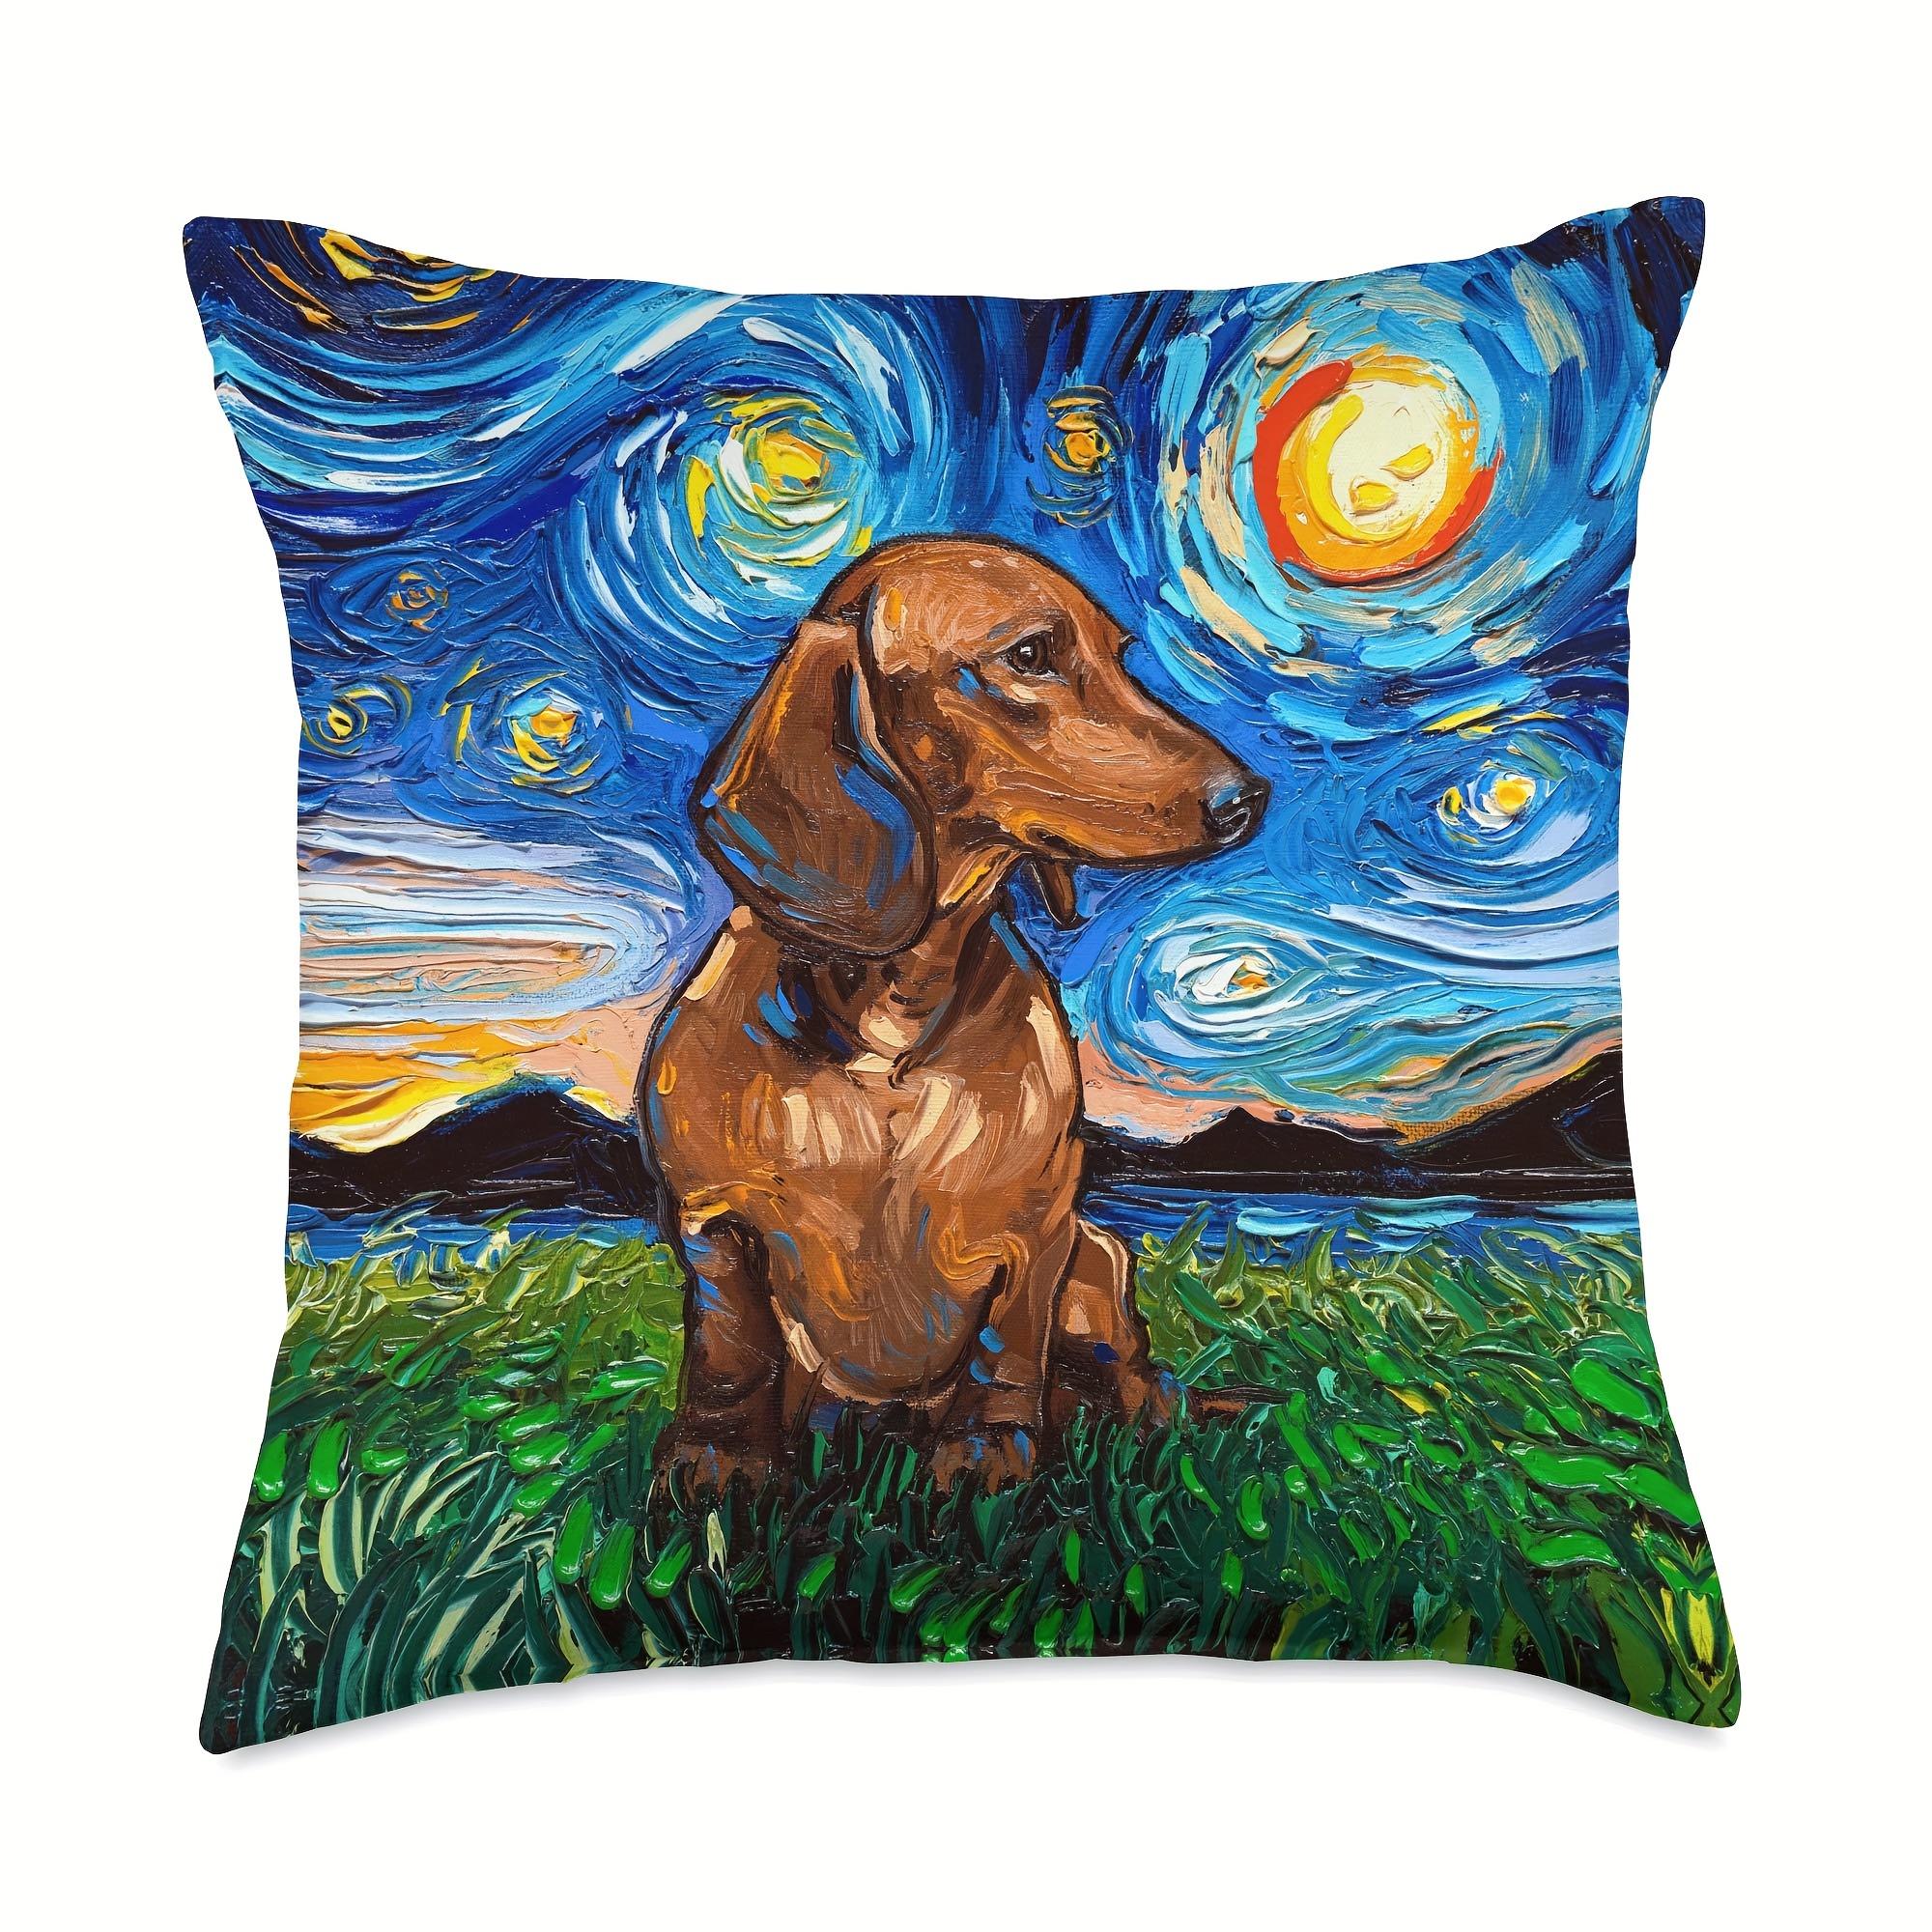 

1pc Brown Short Haired Dachshund Dog Short Plush Throw Pillow Cover Funny Dog Throw Pillowcase For Couch Sofa Bed Bedroom Car Living Decor 18x18 Inch, No Pillow Core